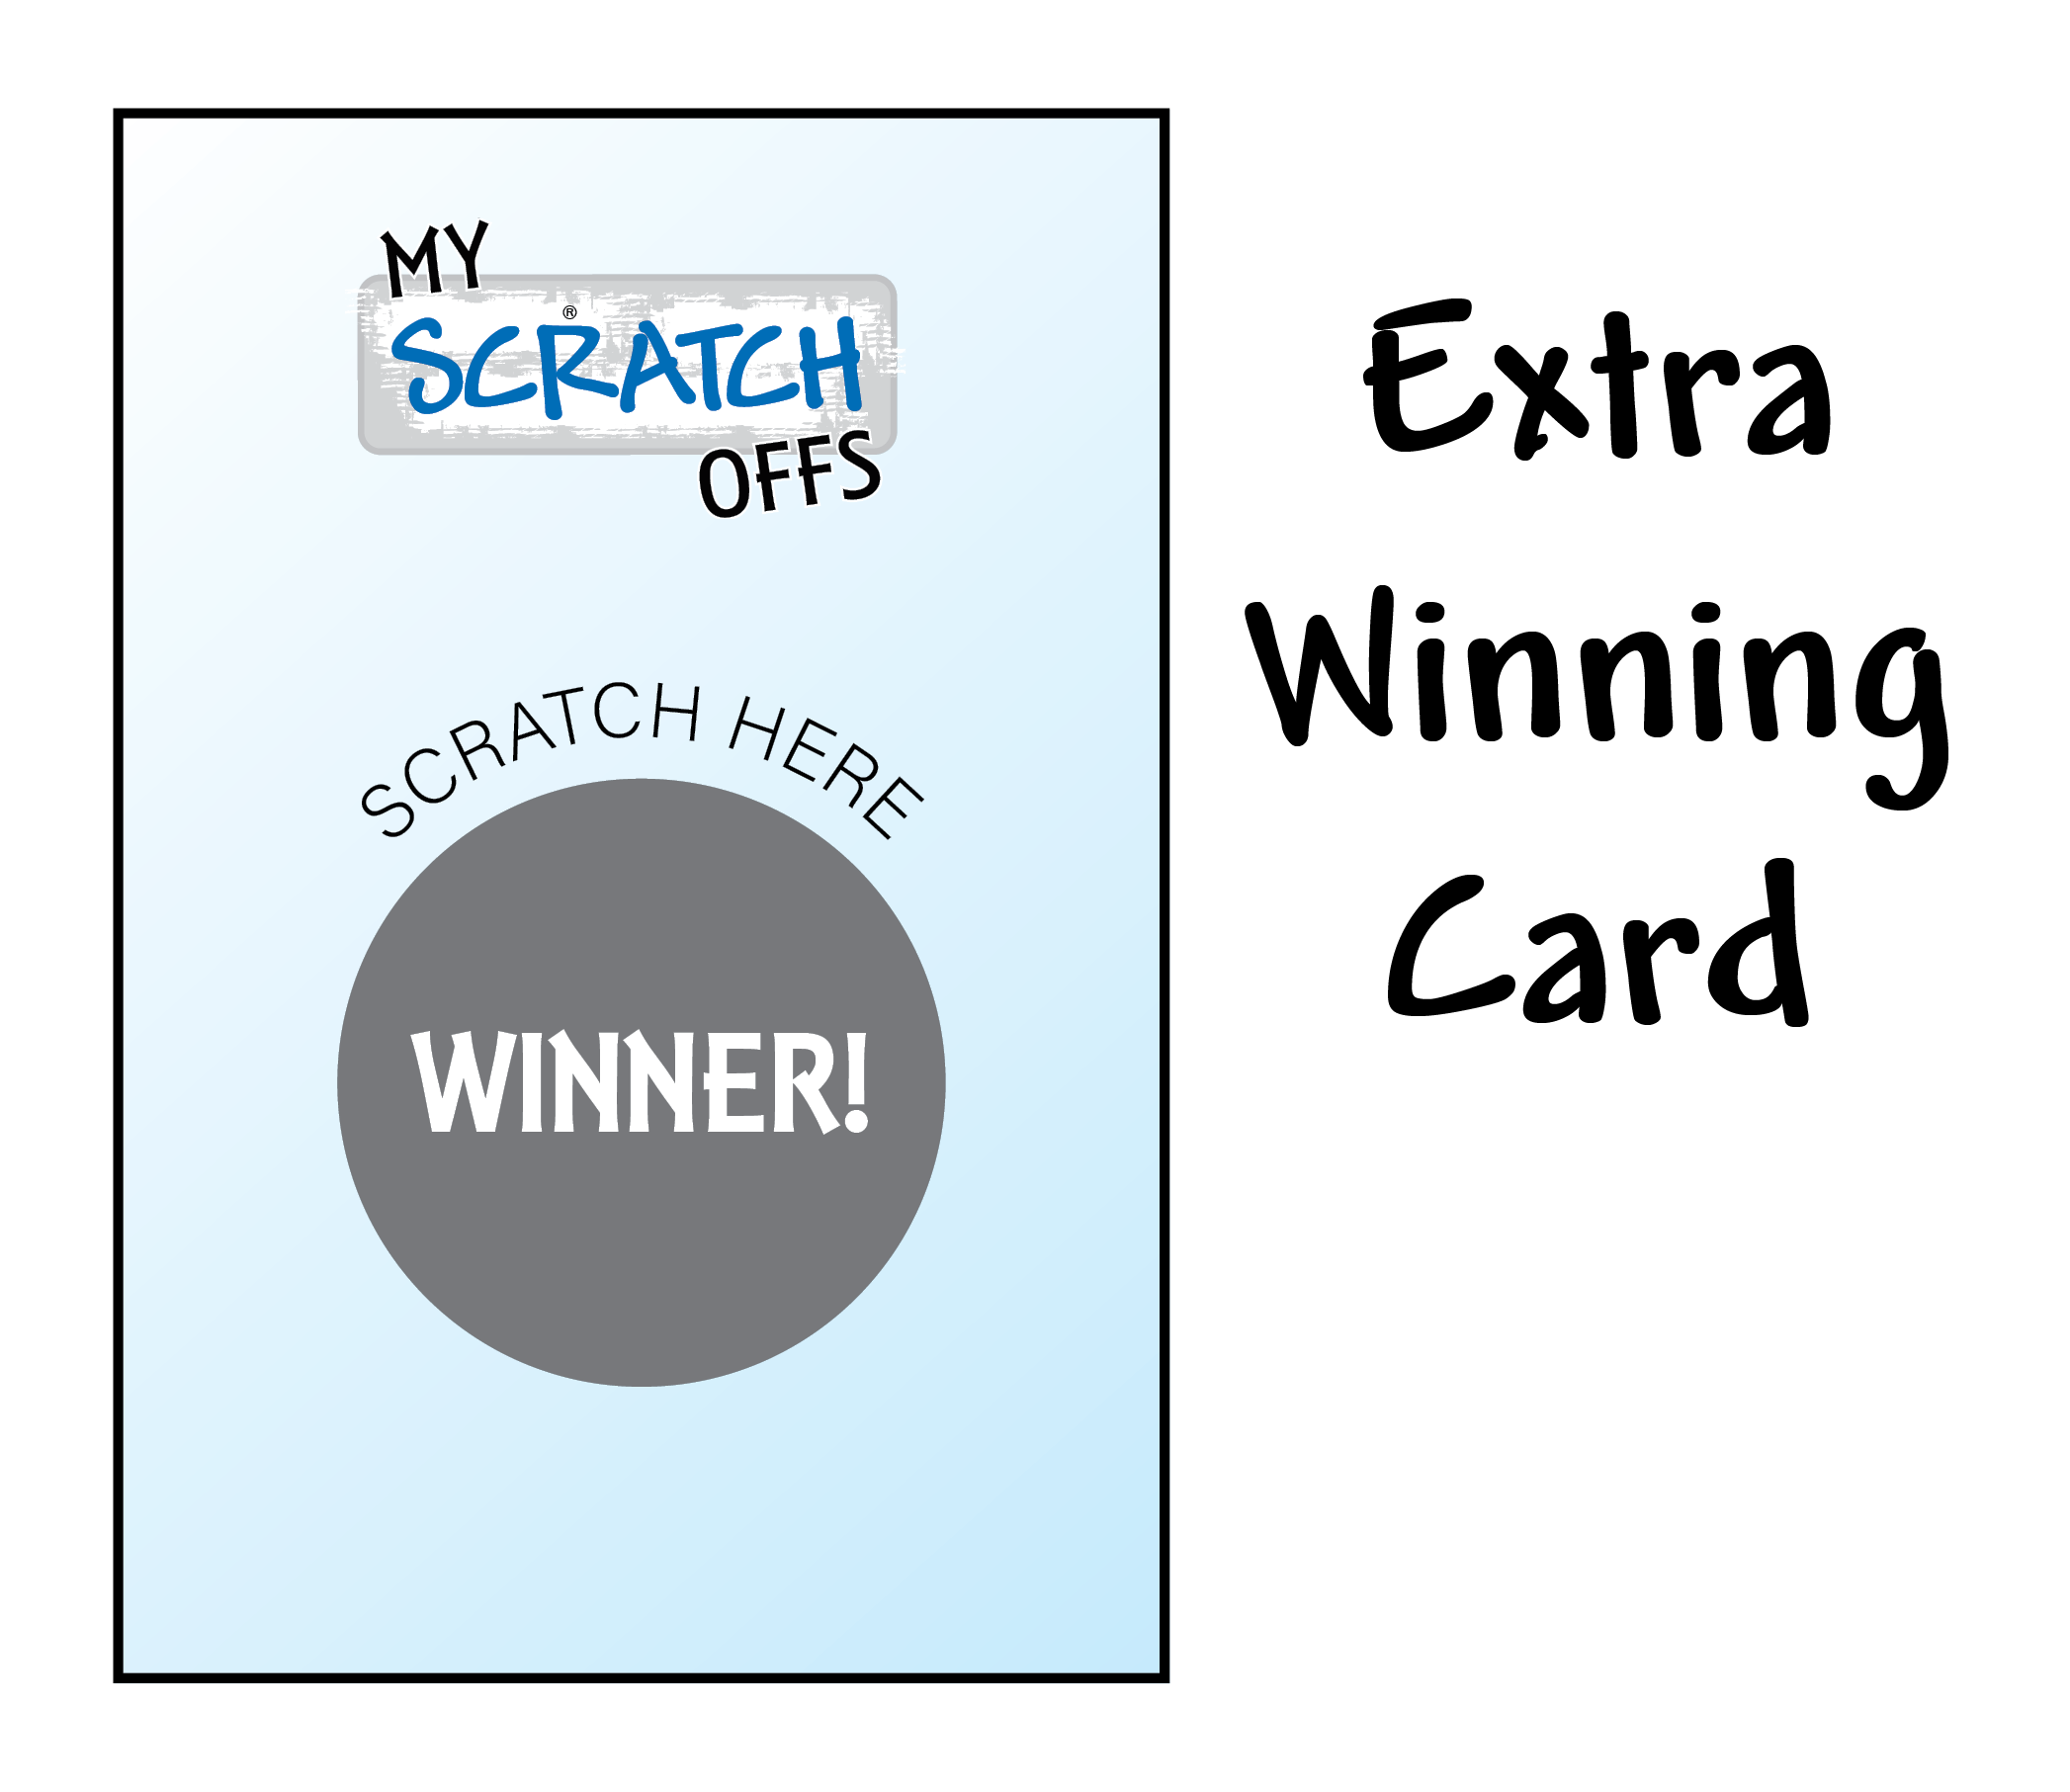 Extra Winning Card - All-Occasion (Copy) - My Scratch Offs